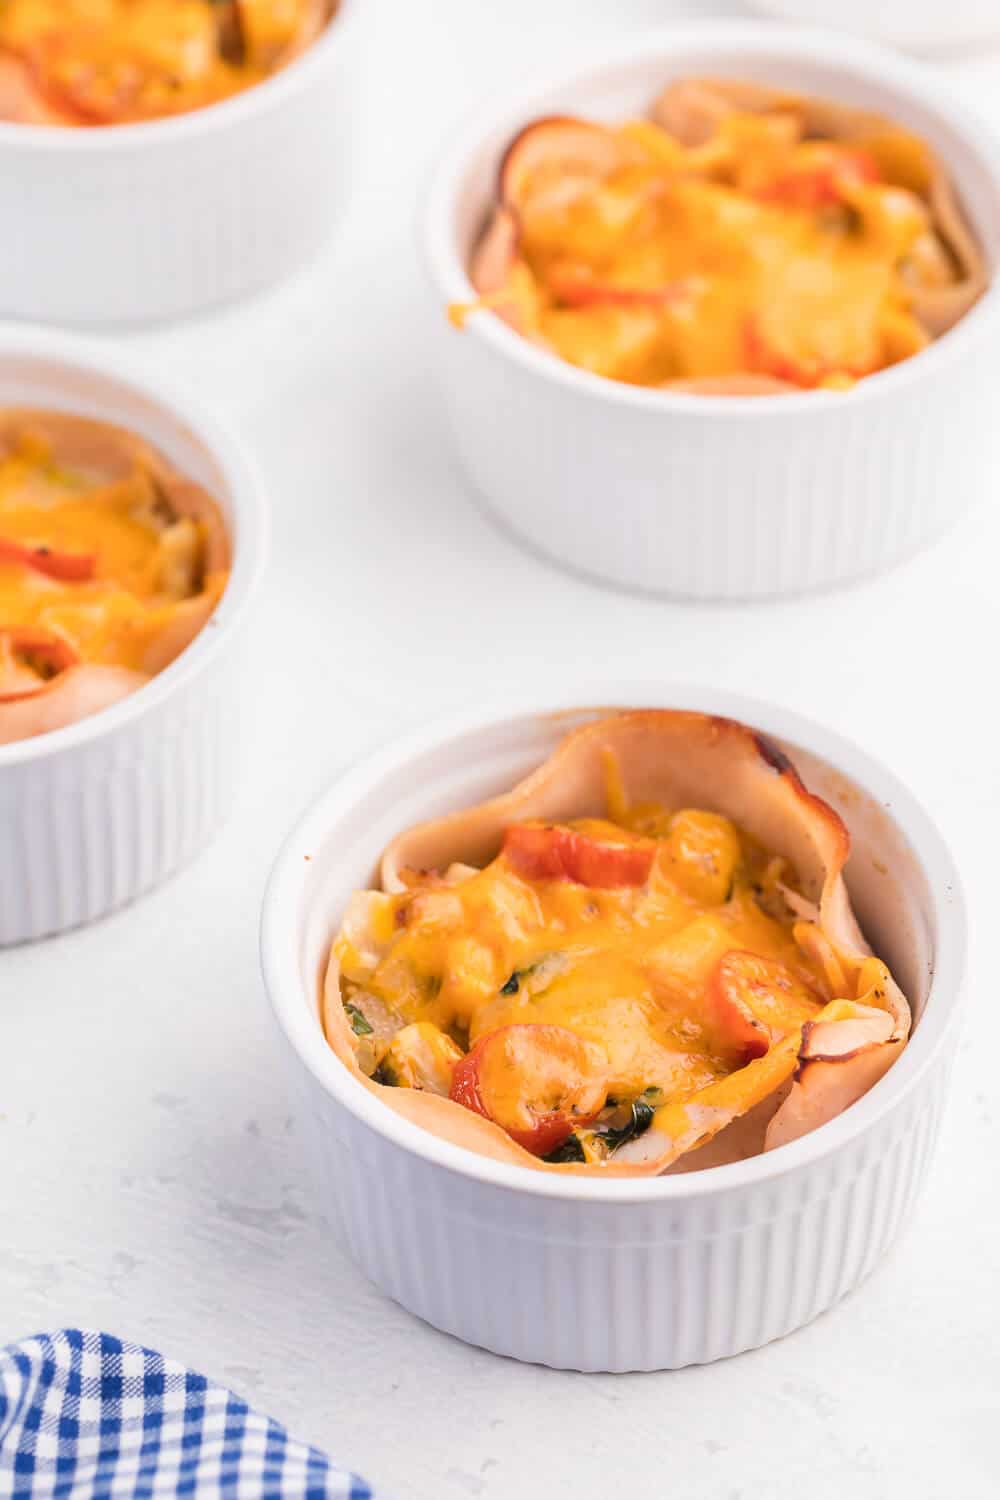 Chicken and Egg Ramekins - A brunch recipe your family will love! Chicken, eggs, cheese and fresh basil are baked to perfection in a ramekin.